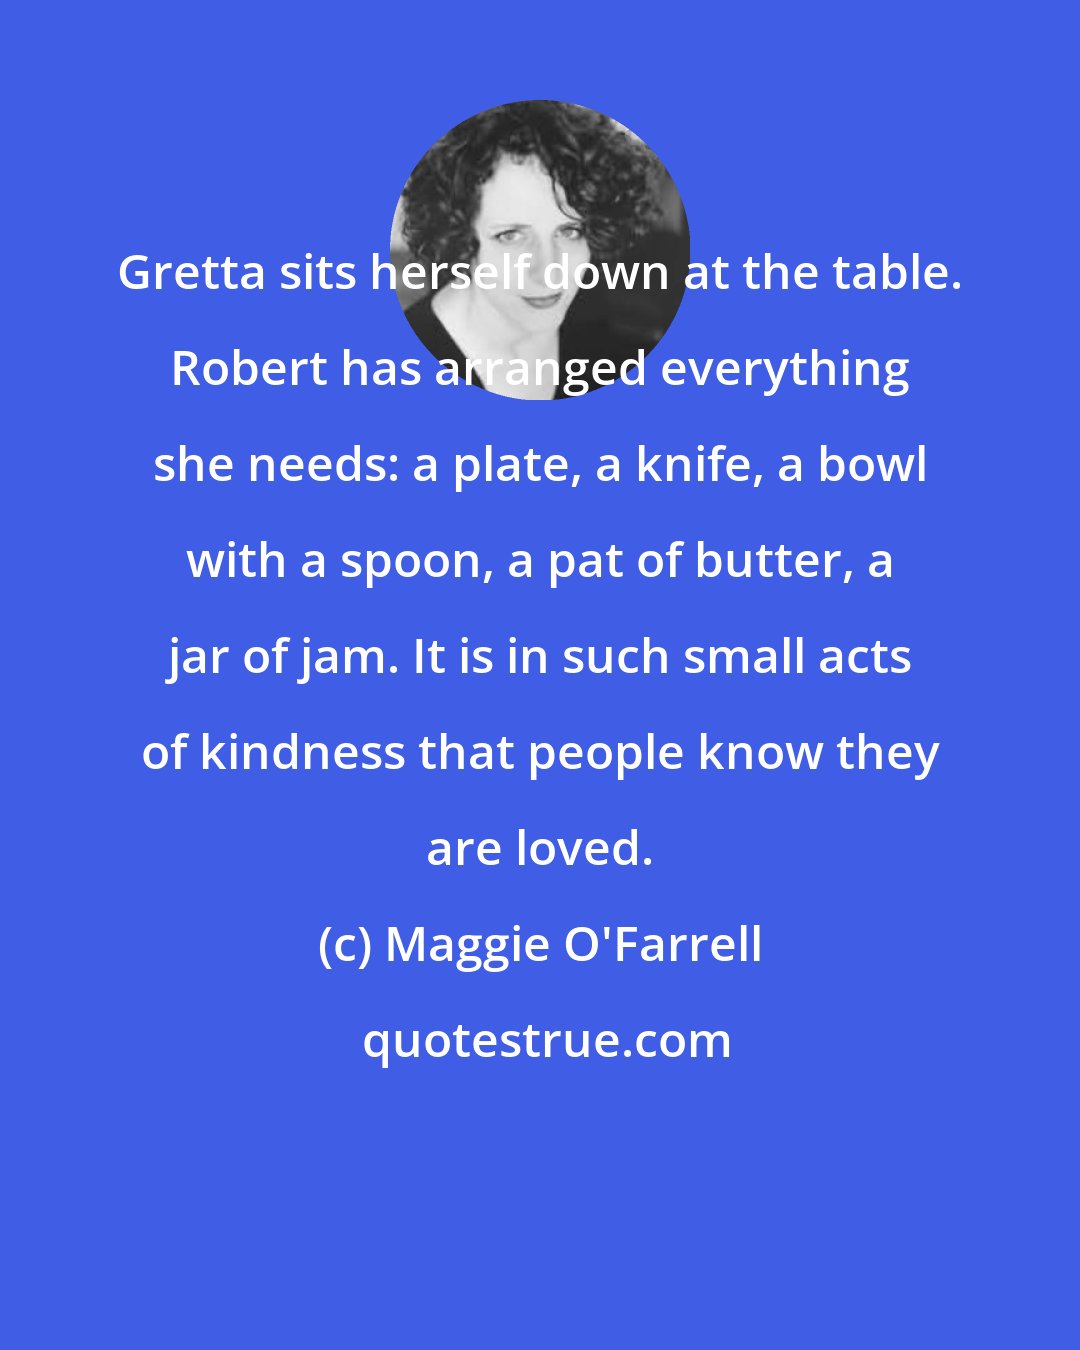 Maggie O'Farrell: Gretta sits herself down at the table. Robert has arranged everything she needs: a plate, a knife, a bowl with a spoon, a pat of butter, a jar of jam. It is in such small acts of kindness that people know they are loved.